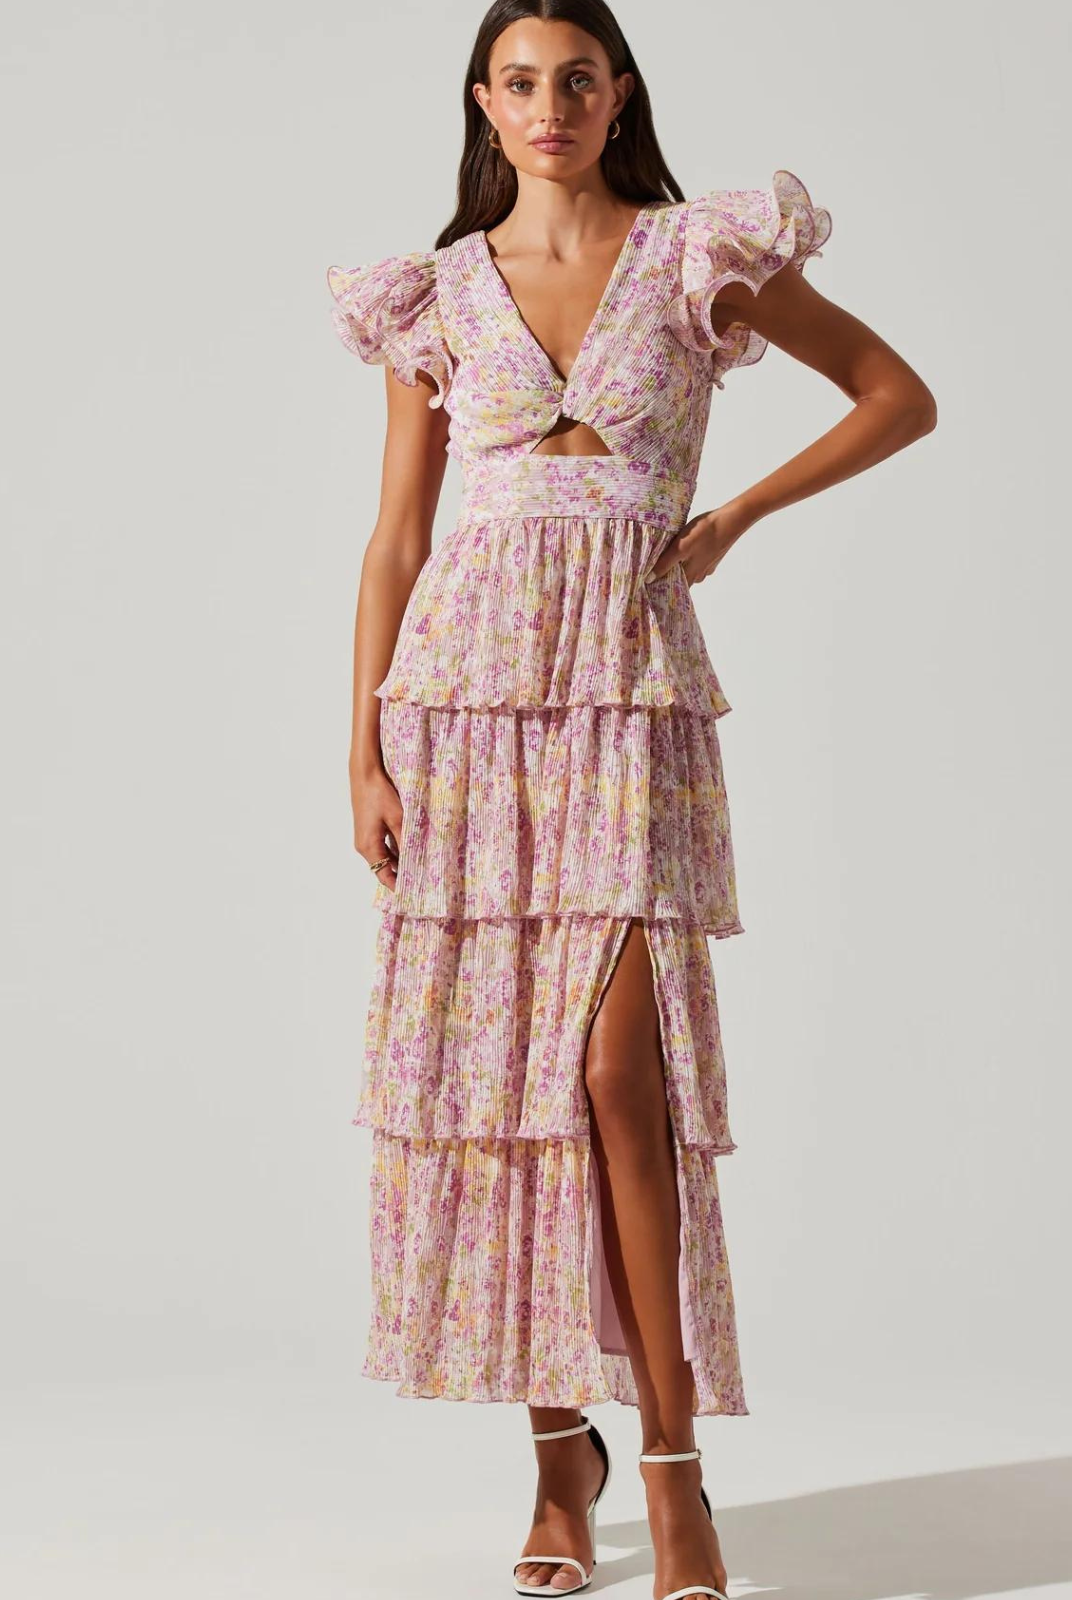 ASTR The Label Emporia Dress. Floral print, pleated finish, ruffle sleeves Center cutout, tiered midi-length skirt, side slit Concealed back zipper.